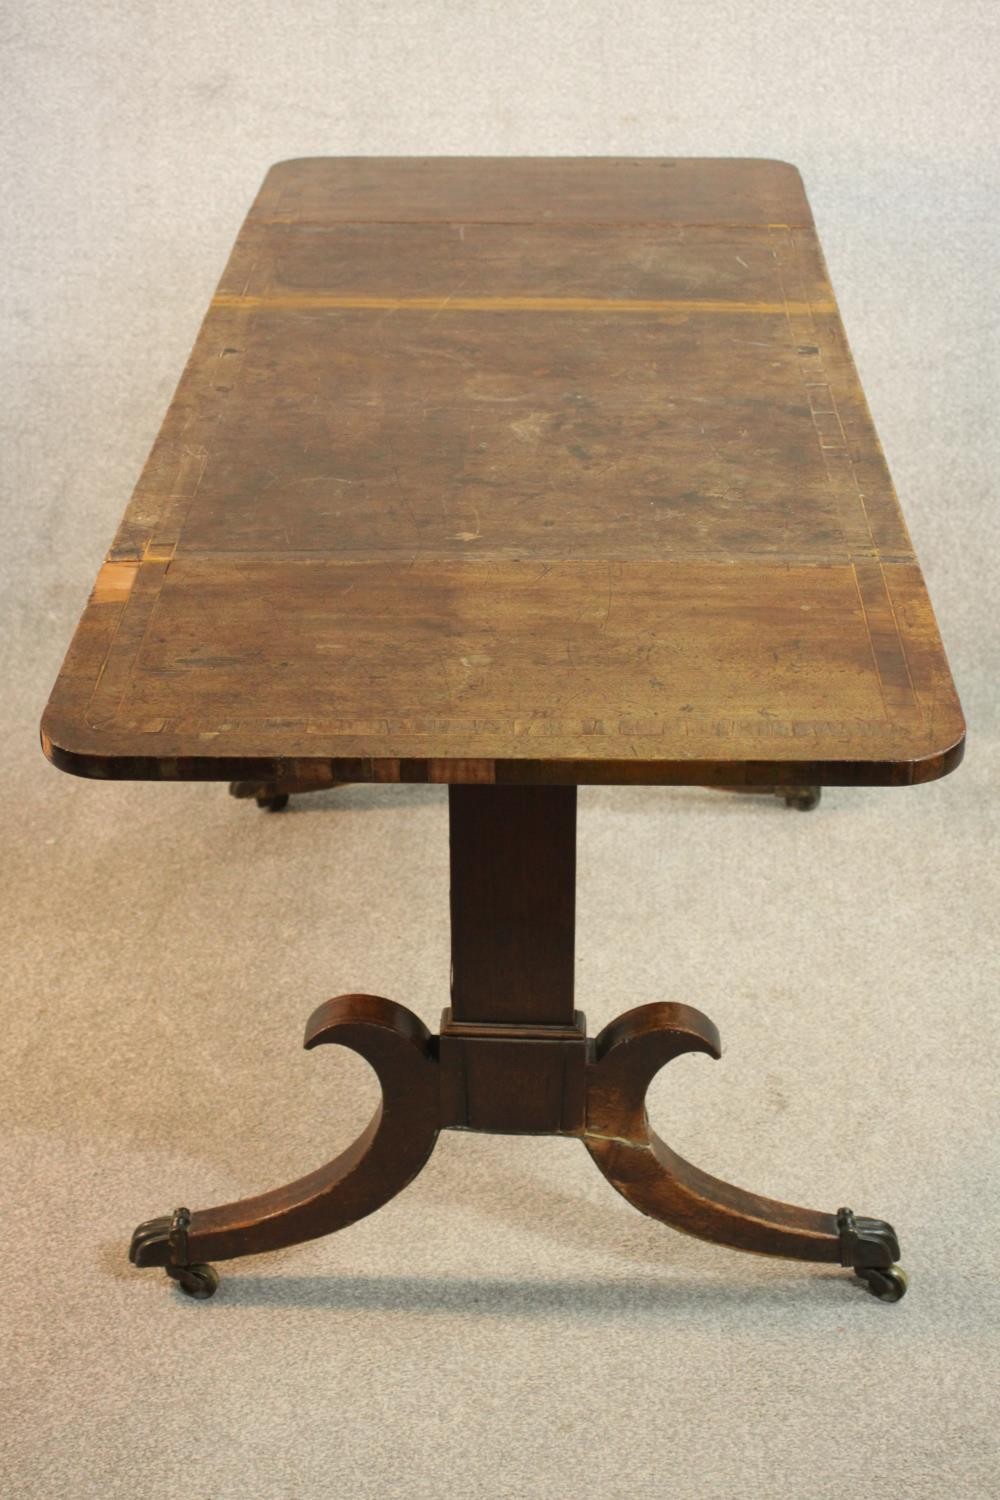 A George III mahogany and crossbanded sofa table with two drop leaves and two drawers, on end - Image 8 of 9